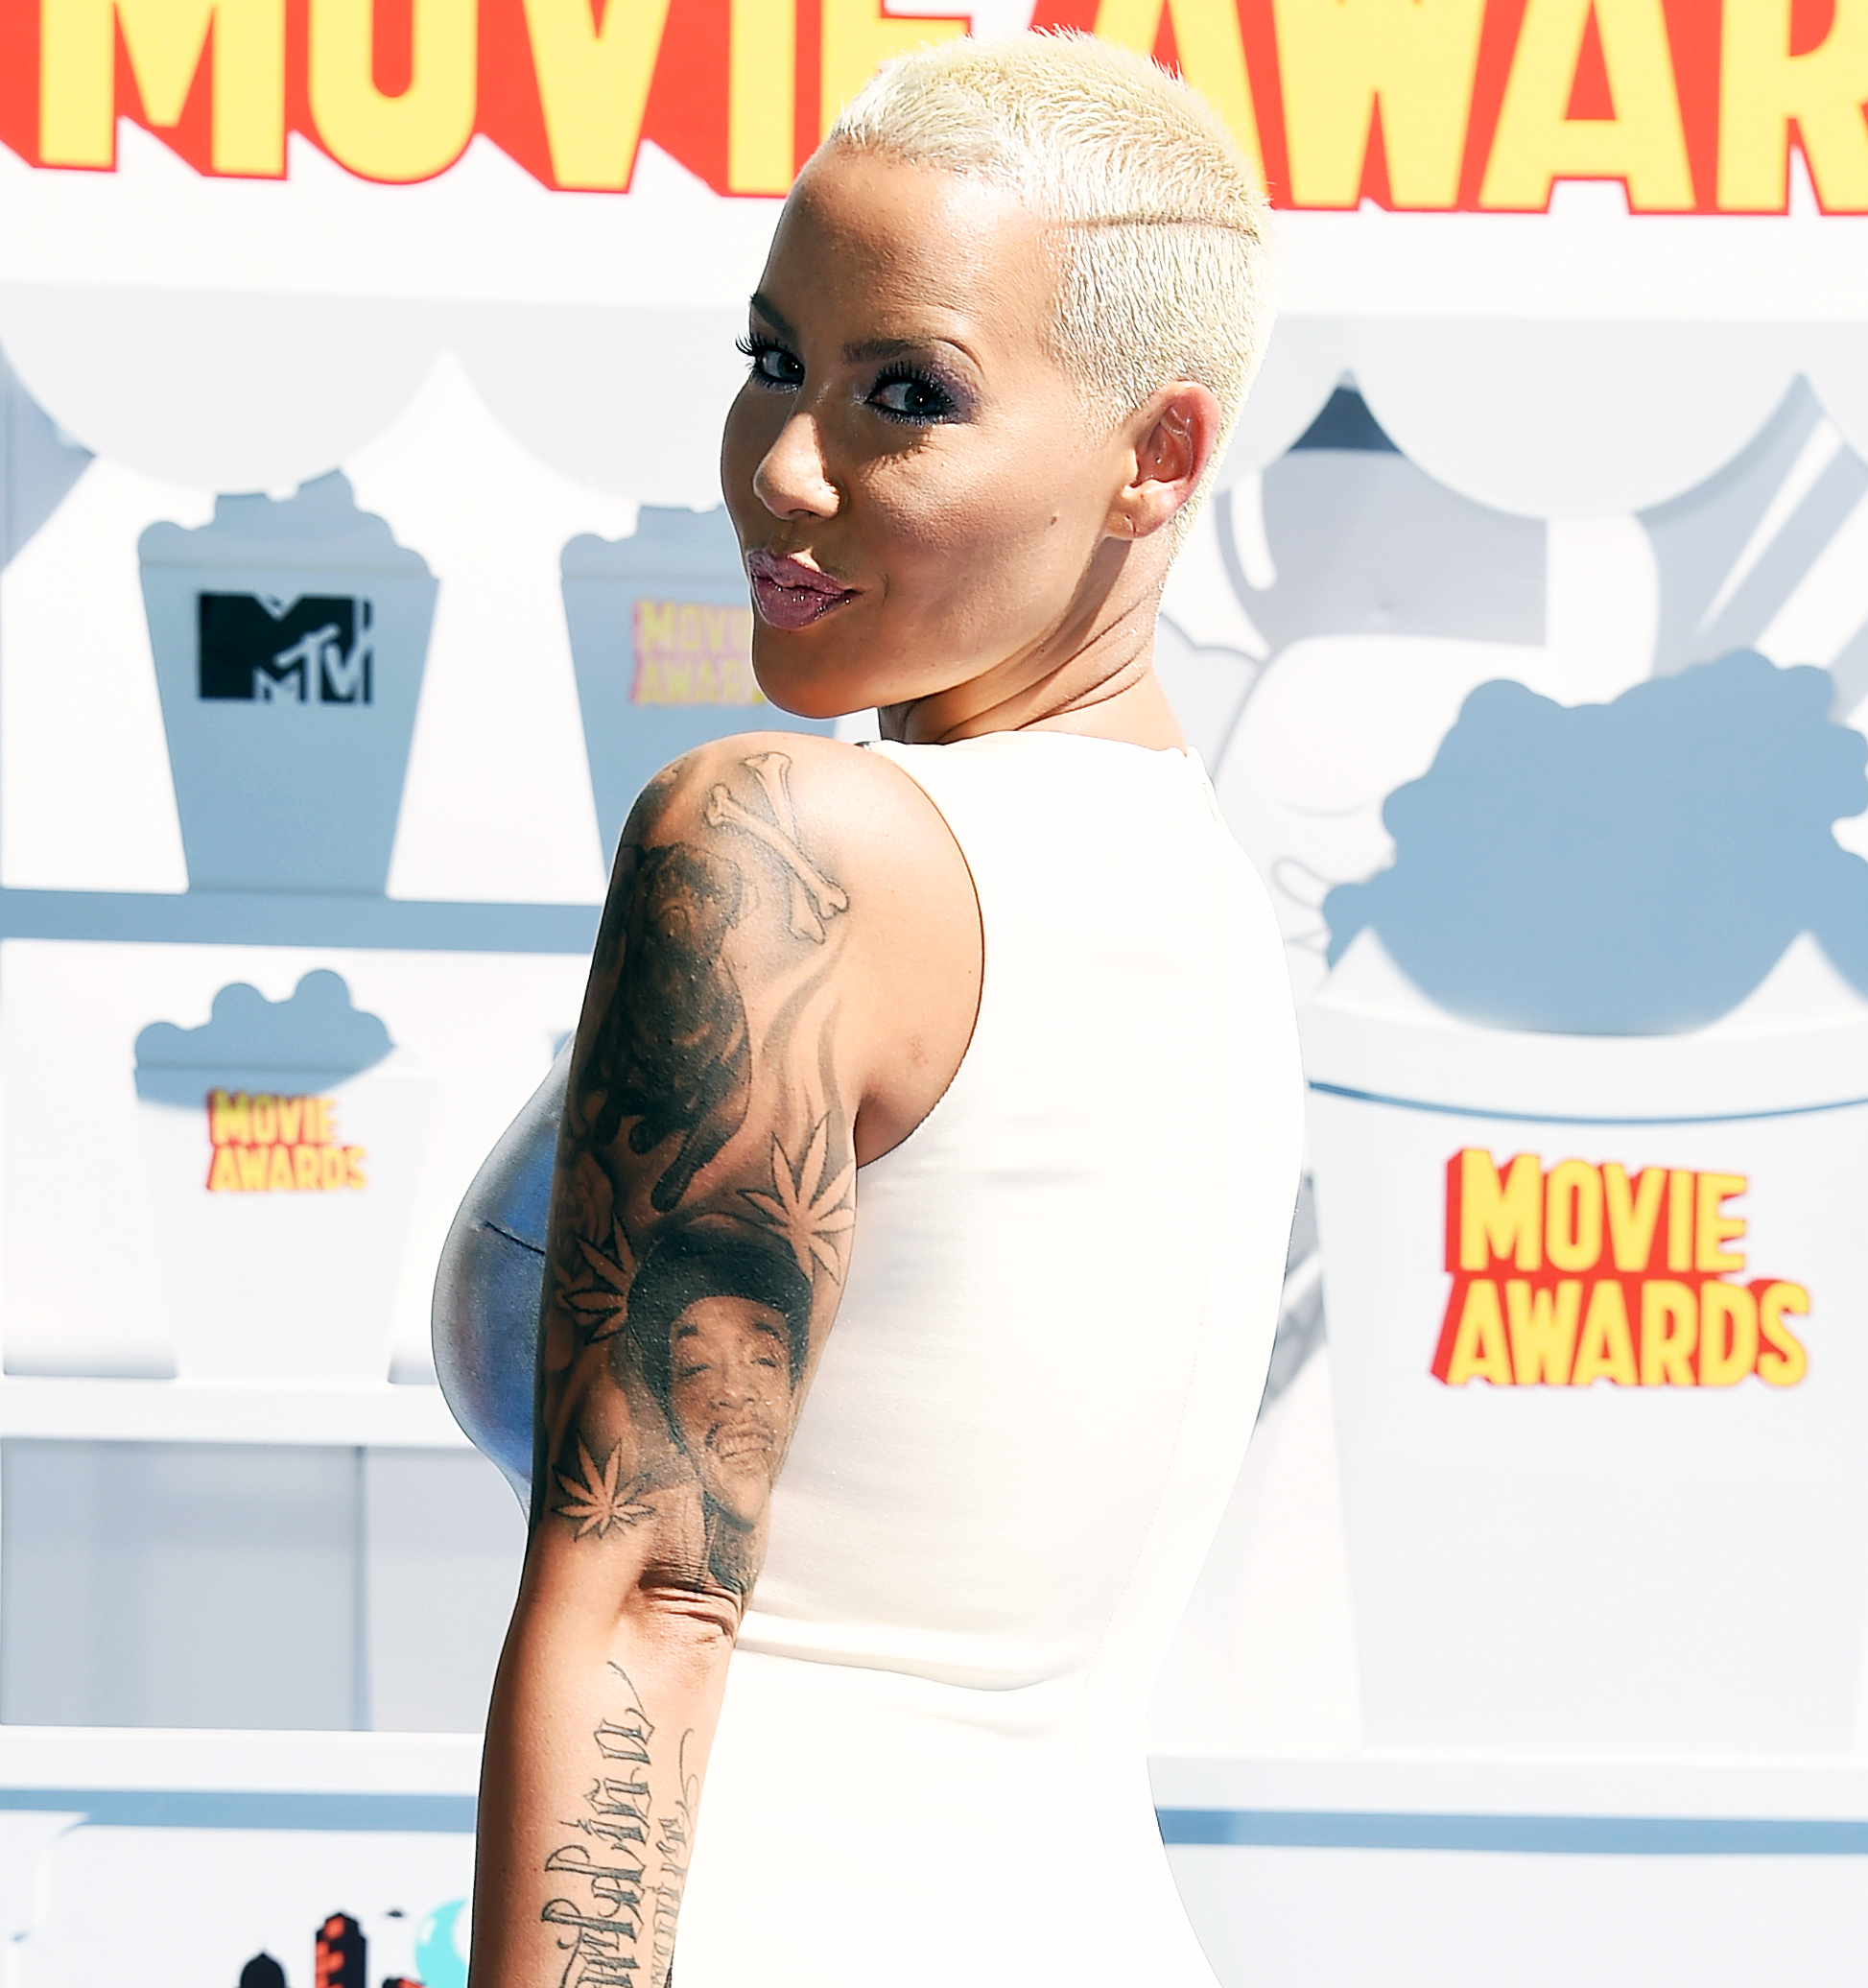 See Amber Rose's Tattoo of Wiz Khalifa's Face